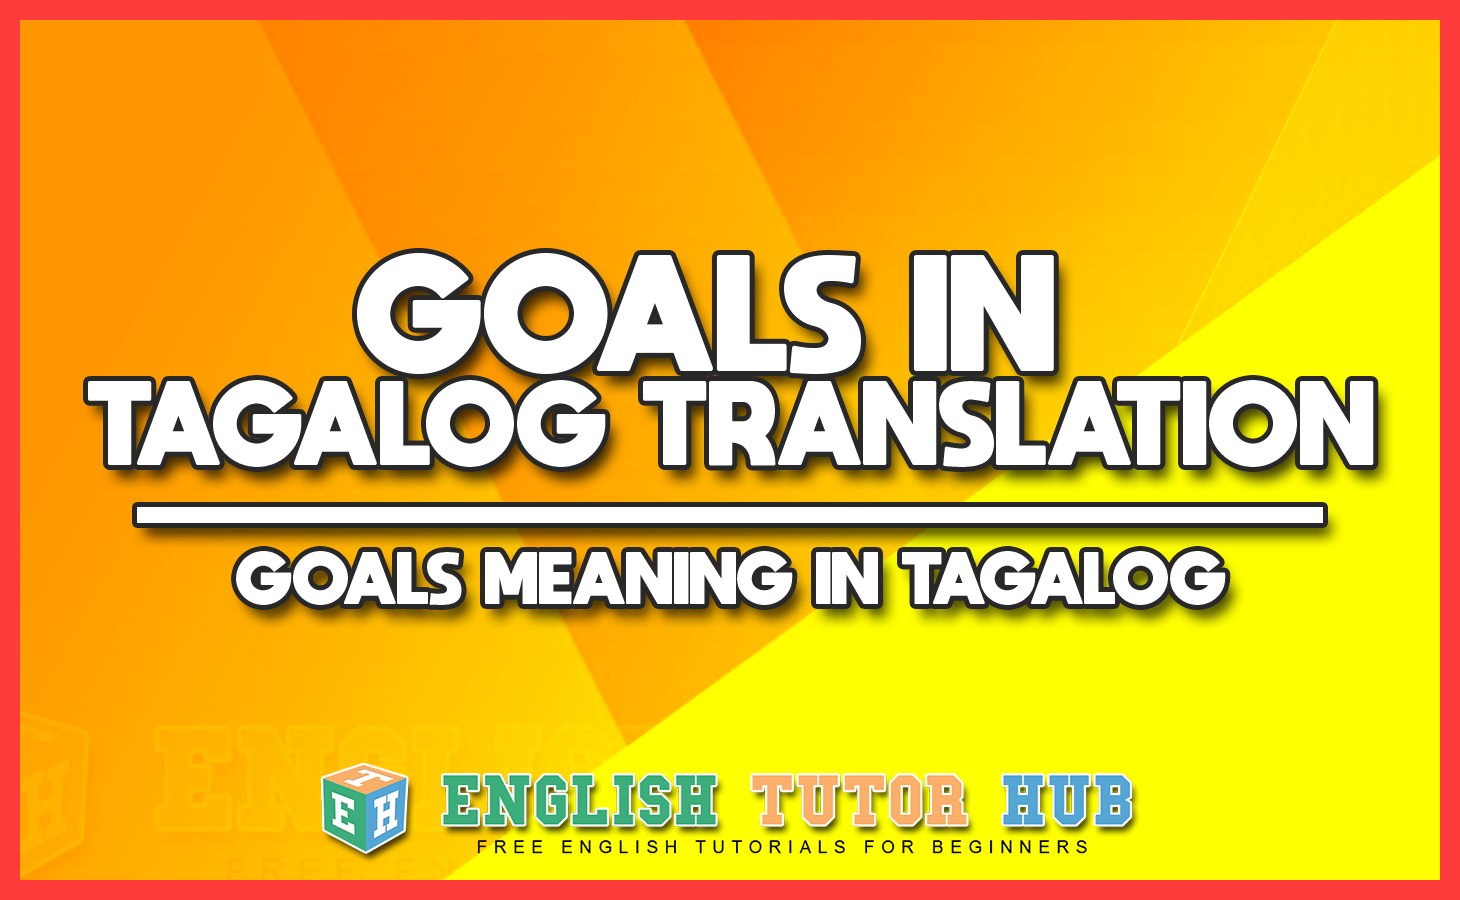 my dreams and goals in life essay tagalog